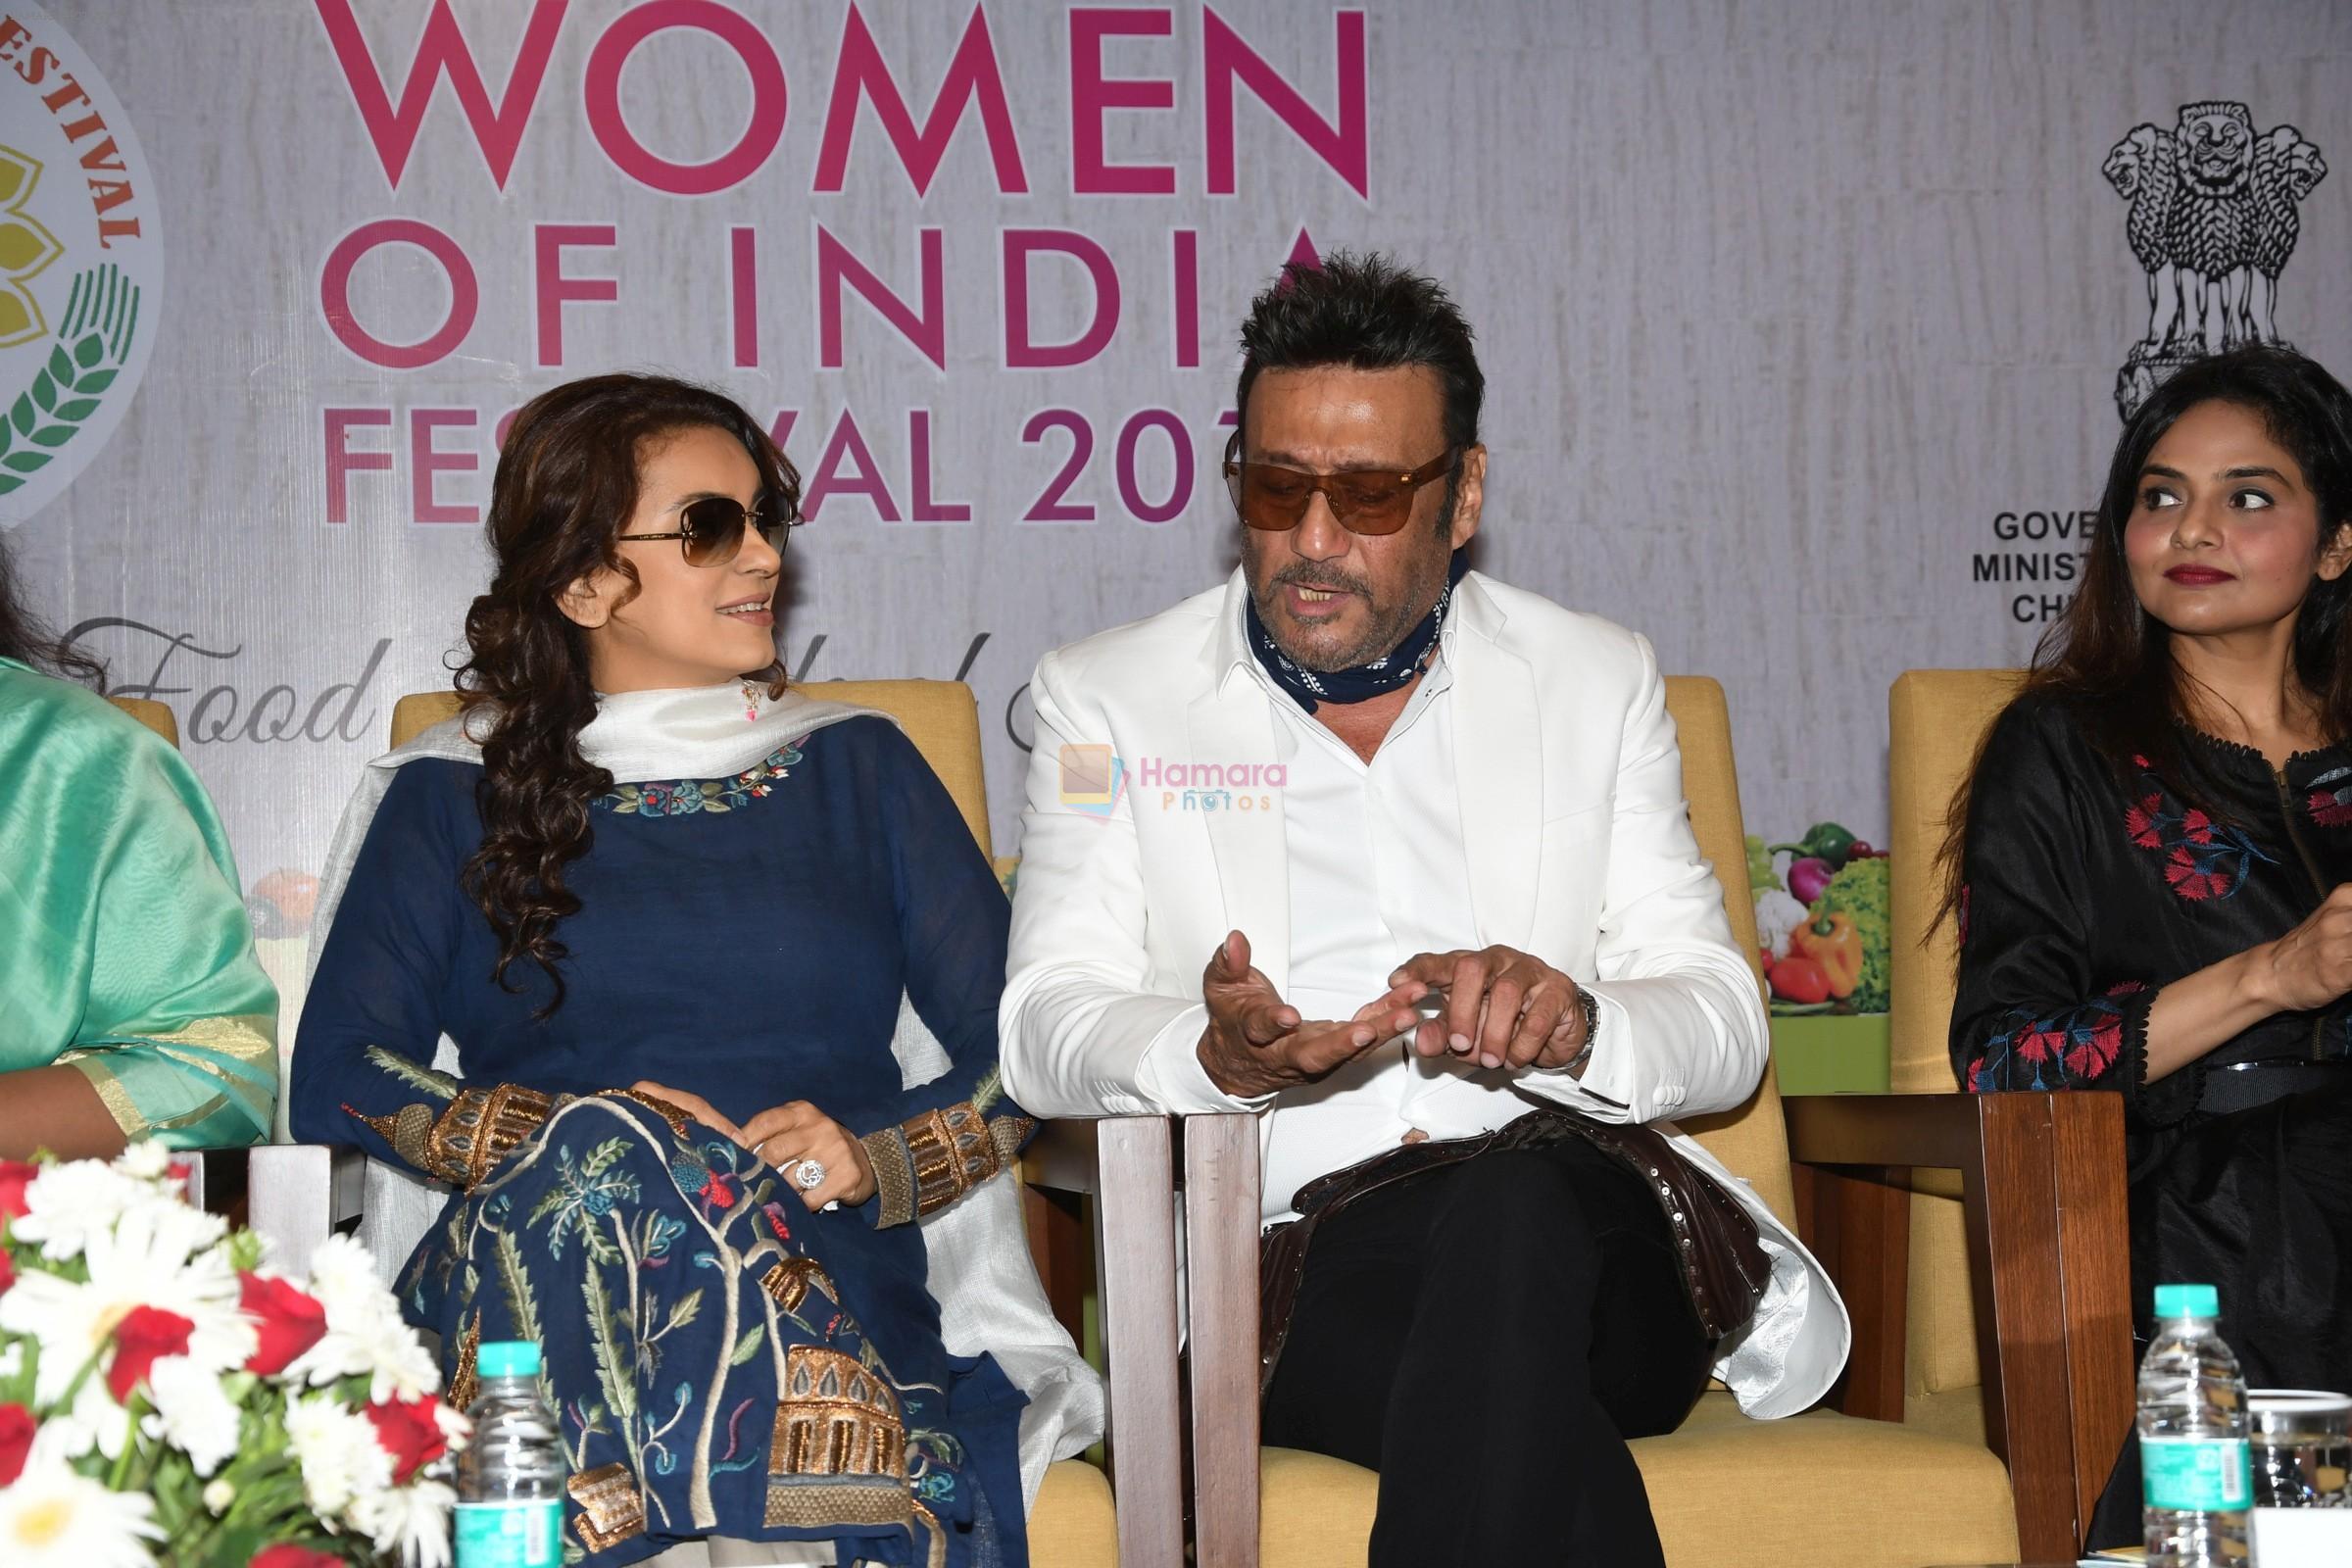 Juhi Chawla, Jackie Shroff, Madhoo Shah At the Opening Of Women Of India Organic Festival on 18th March 2018